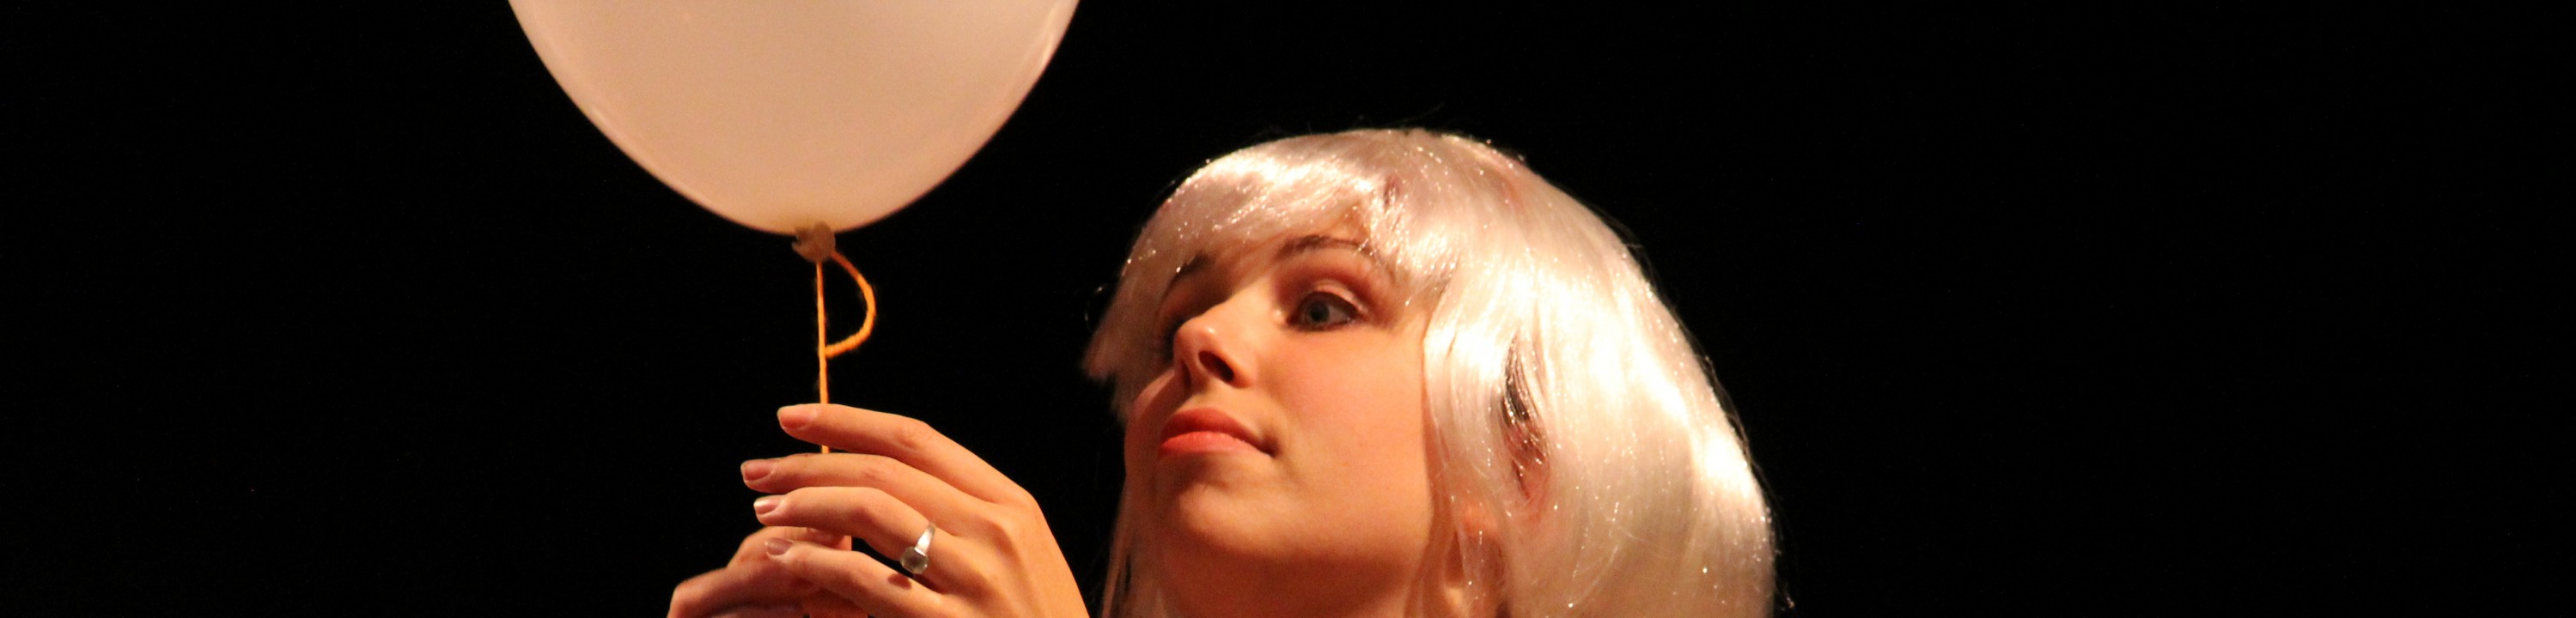 Student performs with a balloon